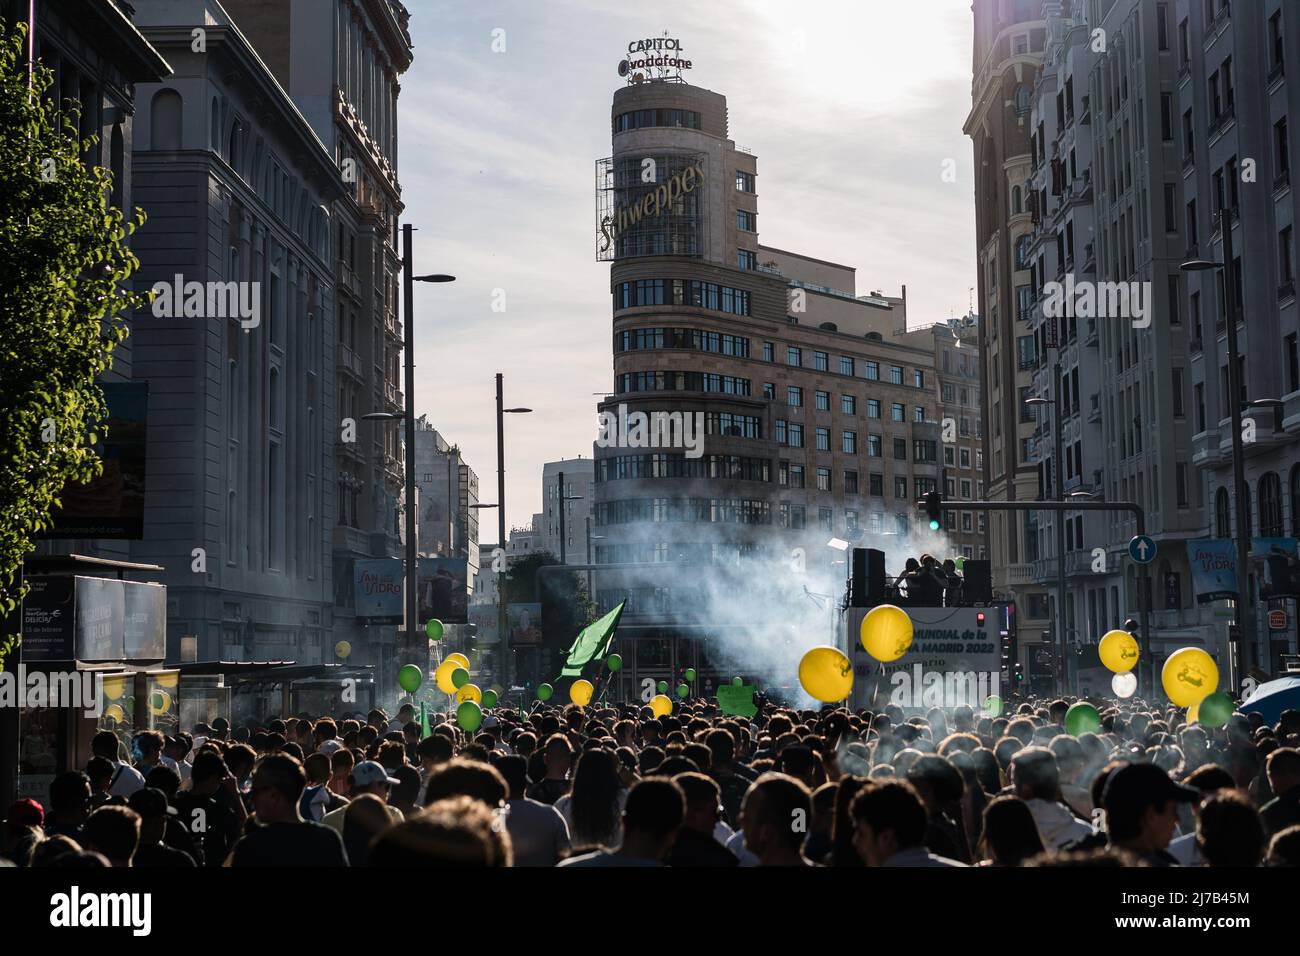 The Gran Via in Madrid with marijuana smoke during a pro-cannabis demonstration. Thousands of pro-cannabis activists took part in a demonstration in La Gran Via in Madrid, Spain, in favor of legalizing the medicinal and recreational use of marijuana. (Photo by Diego Radames / SOPA Images/Sipa USA) Stock Photo